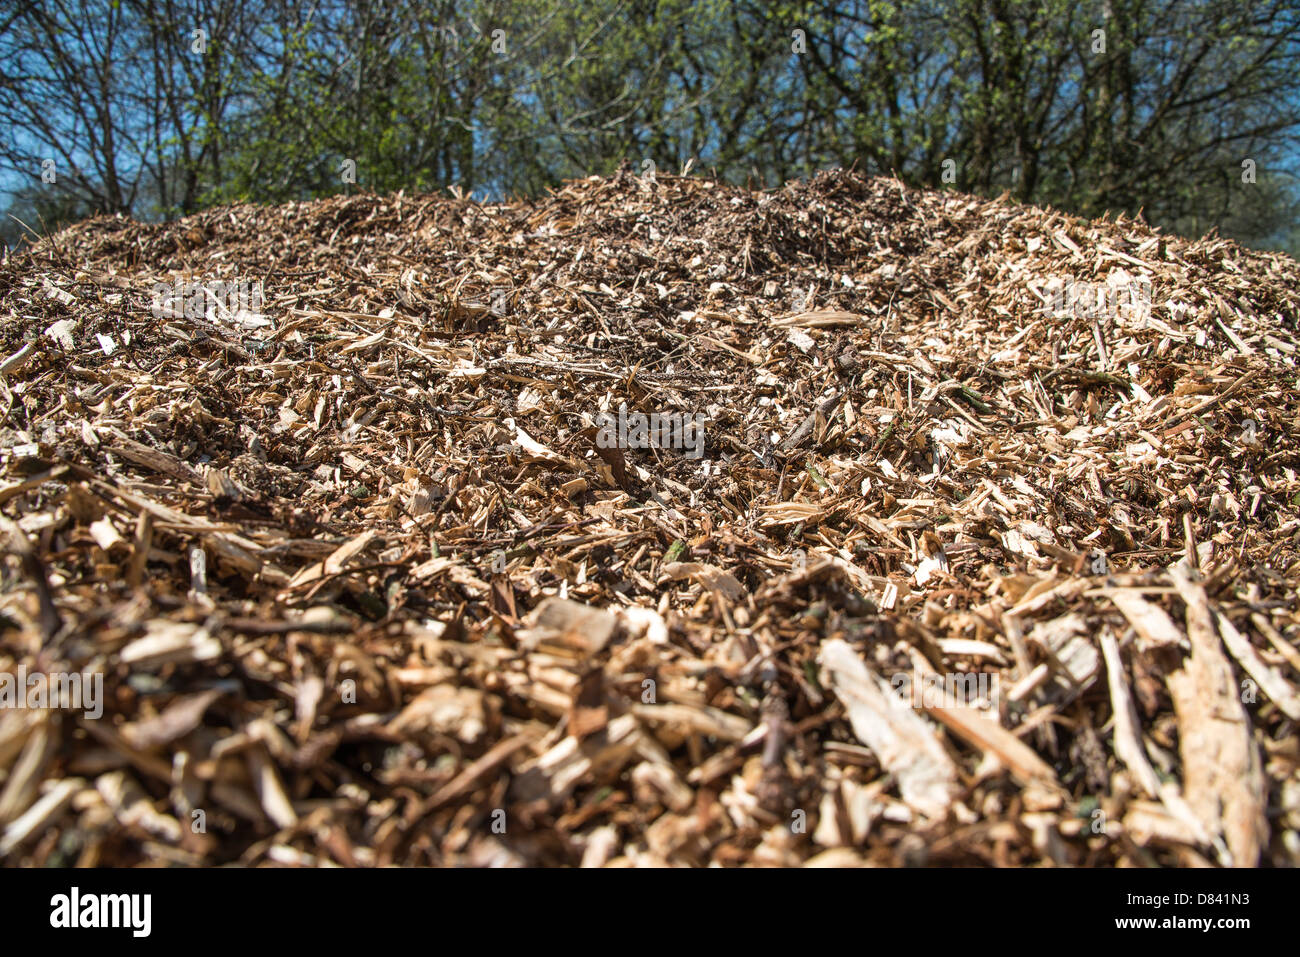 Mountain of wood chip mulch Stock Photo